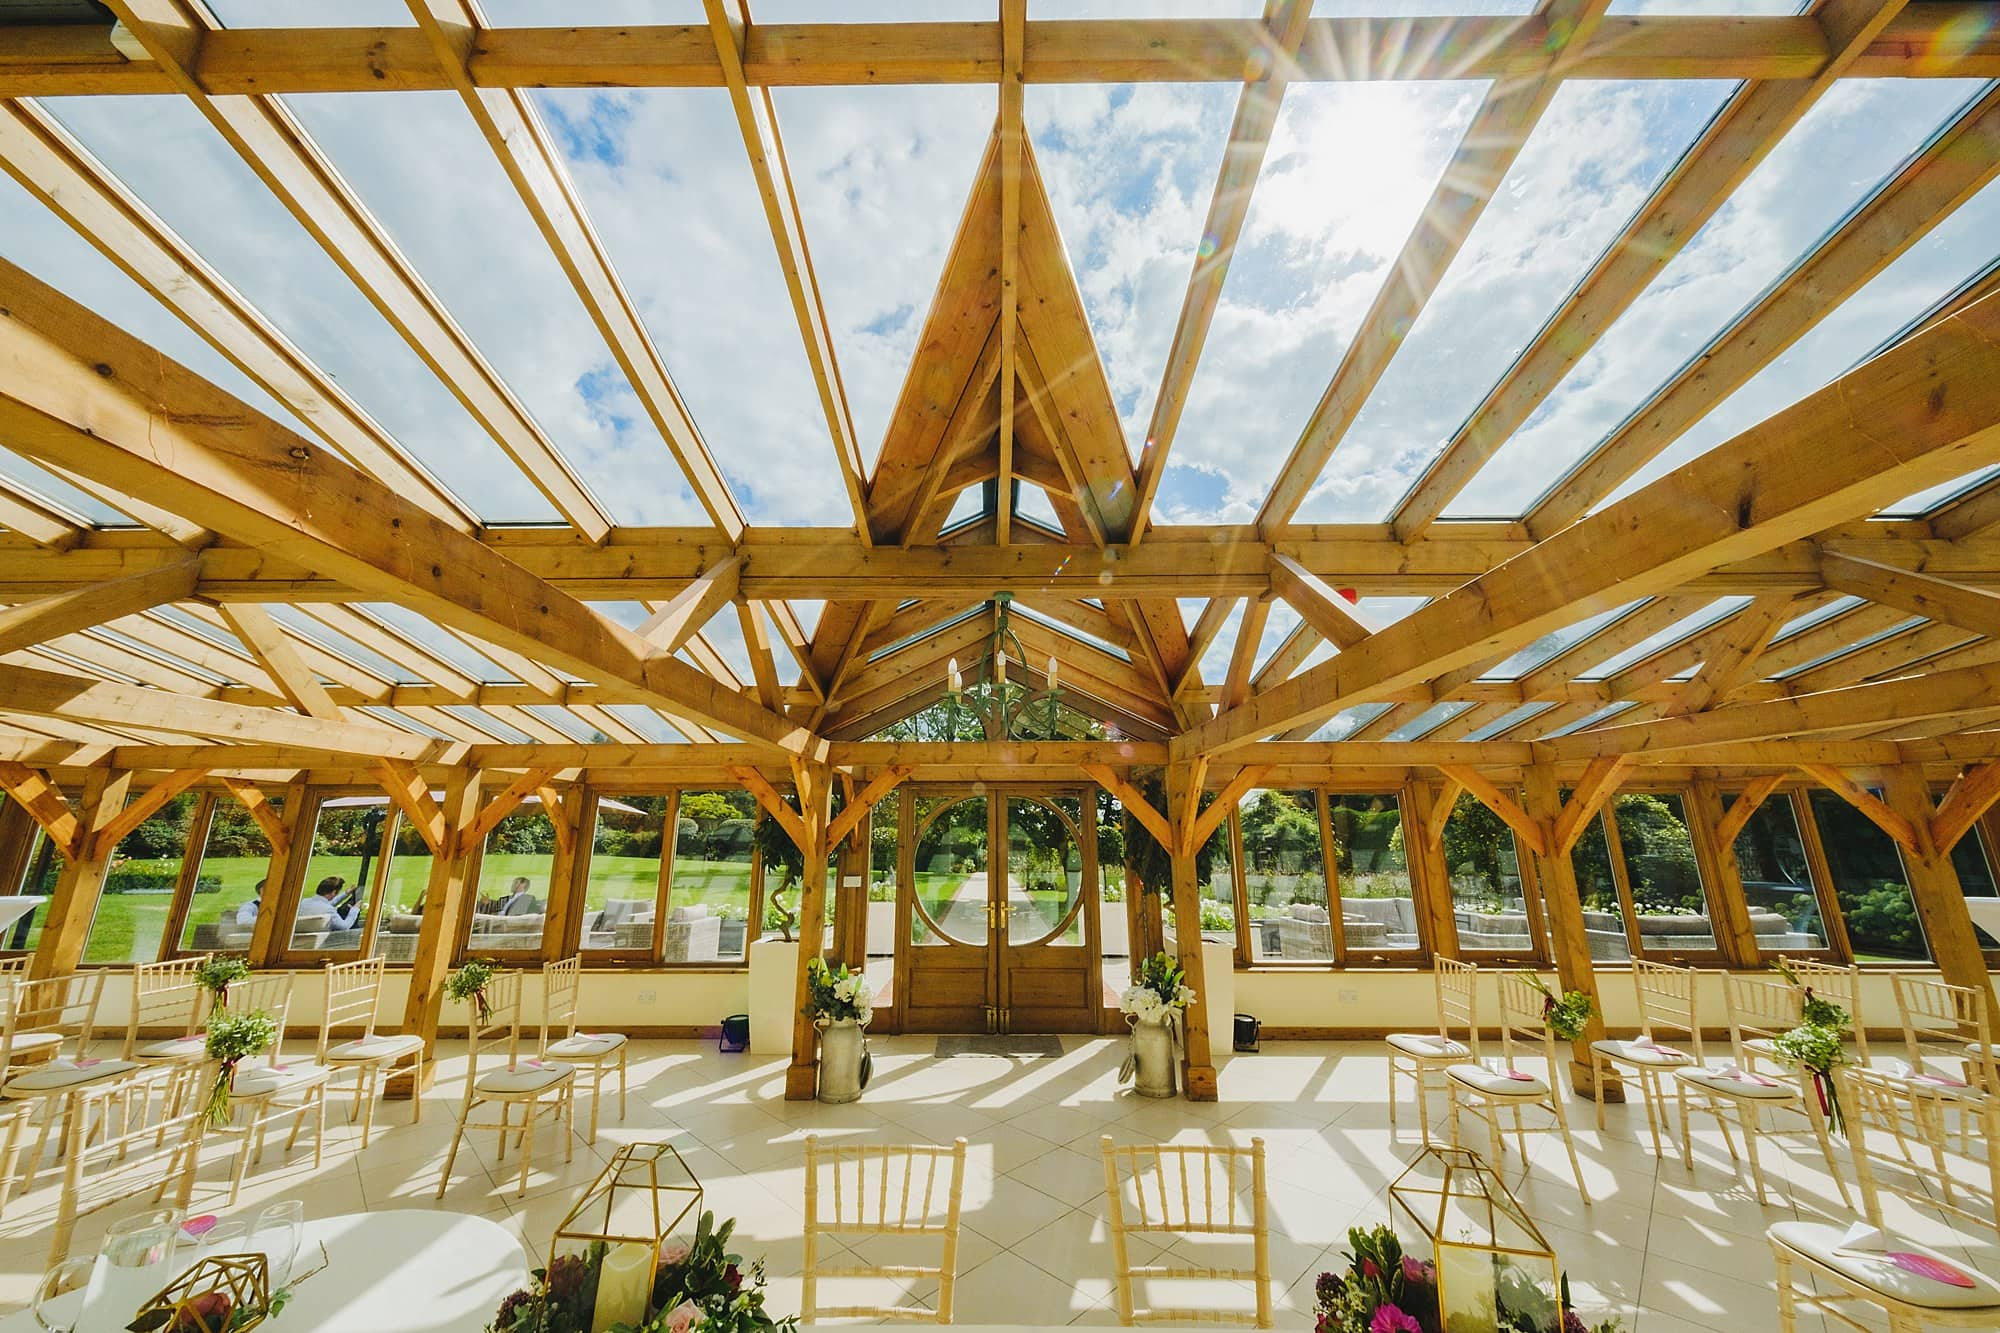 gaynes park wedding photographer Owen Billcliffe captured this wide shot of the orangery in the sun, ready for a wedding ceremony